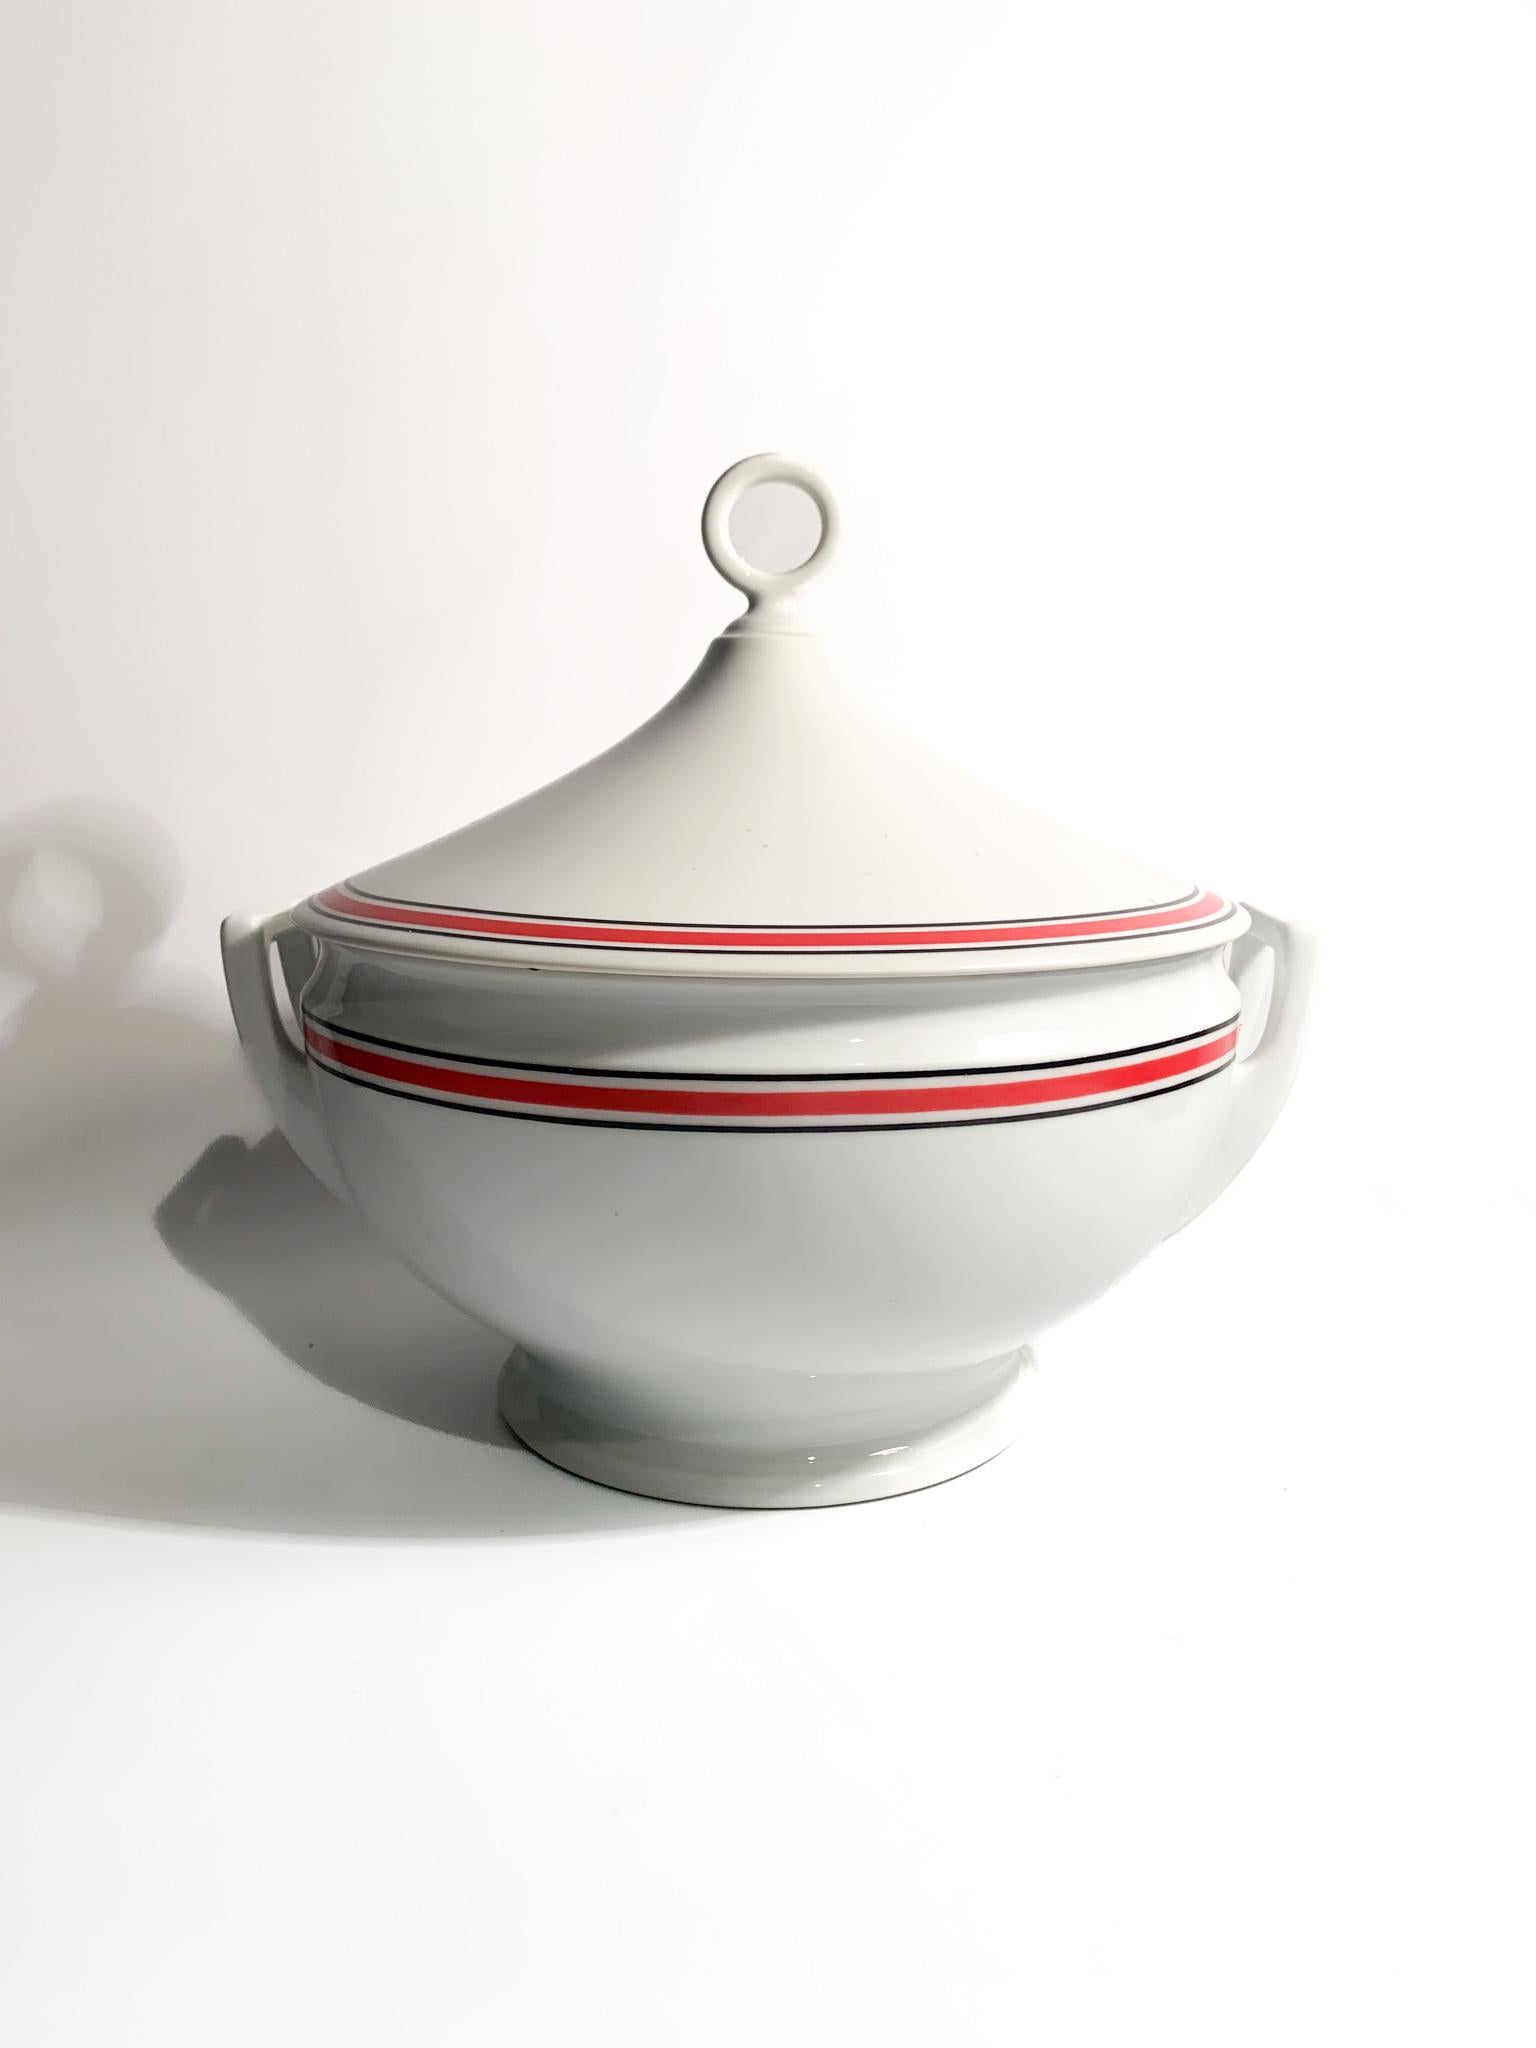 Porcelain soup tureen by Richard Ginori, Impero model designed by Gio Ponti and made in 1976

Ø cm 24 Ø cm 28 h cm 25

Company of Lombard origin founded in 1896 when the Marquis Carlo Ginori, passionate about white gold, arrived in Doccia to build a